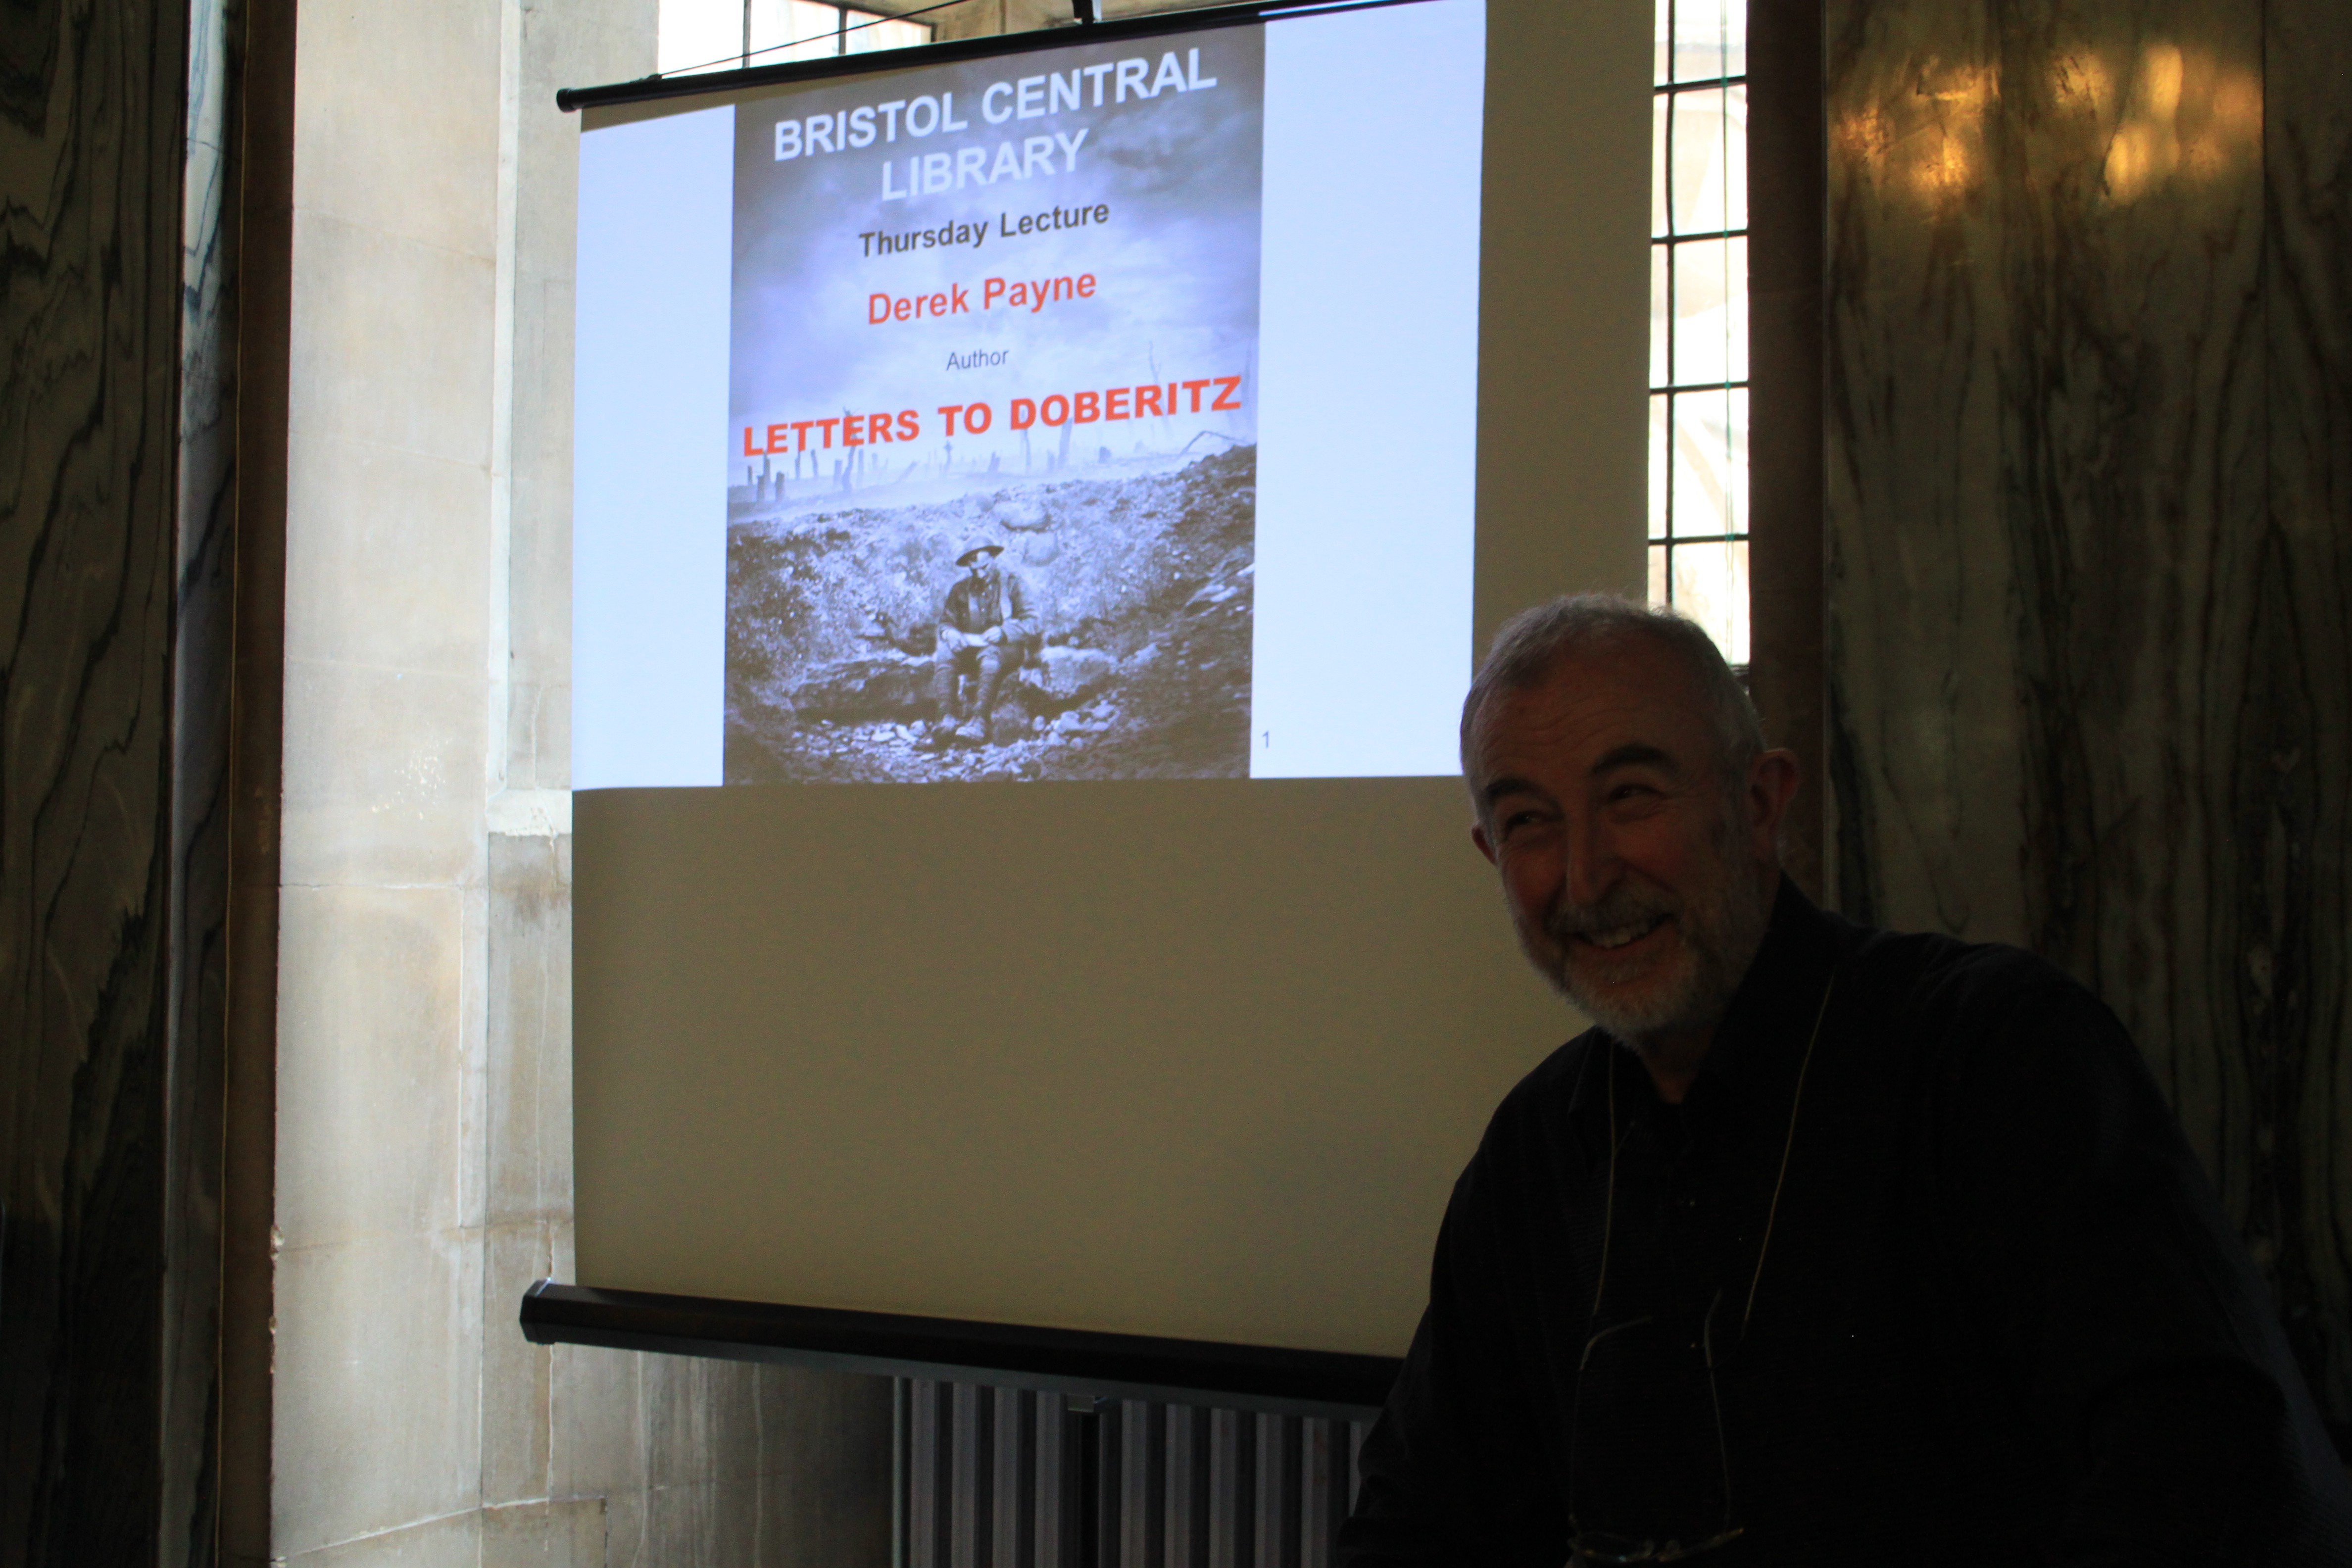 Derek R Payne, the Author of  Letters To Doberitz, Delivered a Talk At the Bristol Library